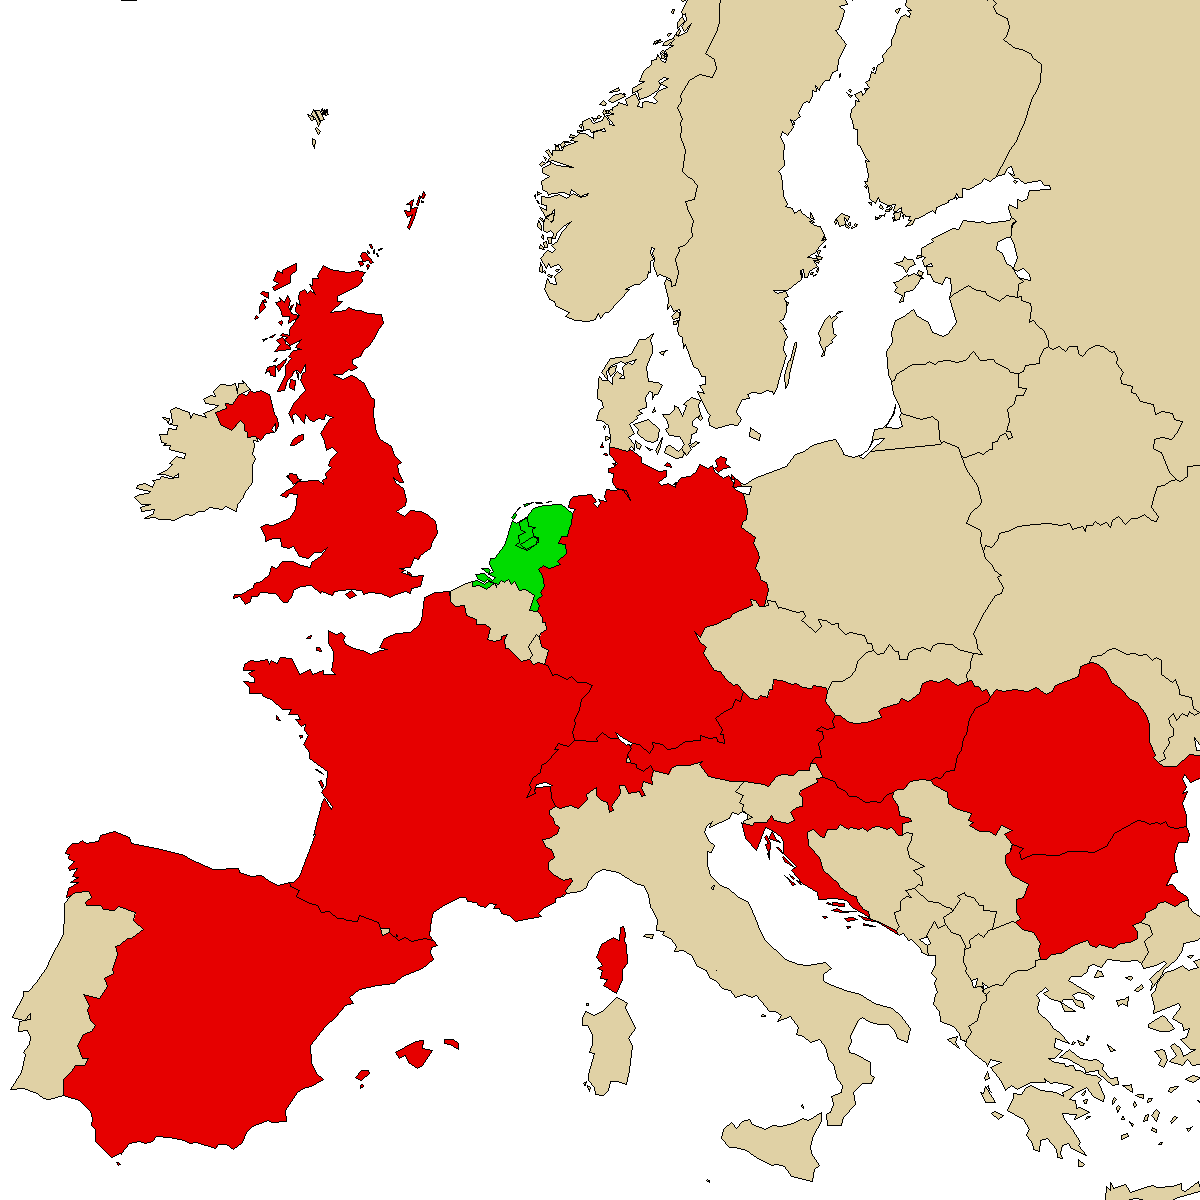 legal info map for our product MDPHP, green are countries with no ban, red with ban, grey is unknown